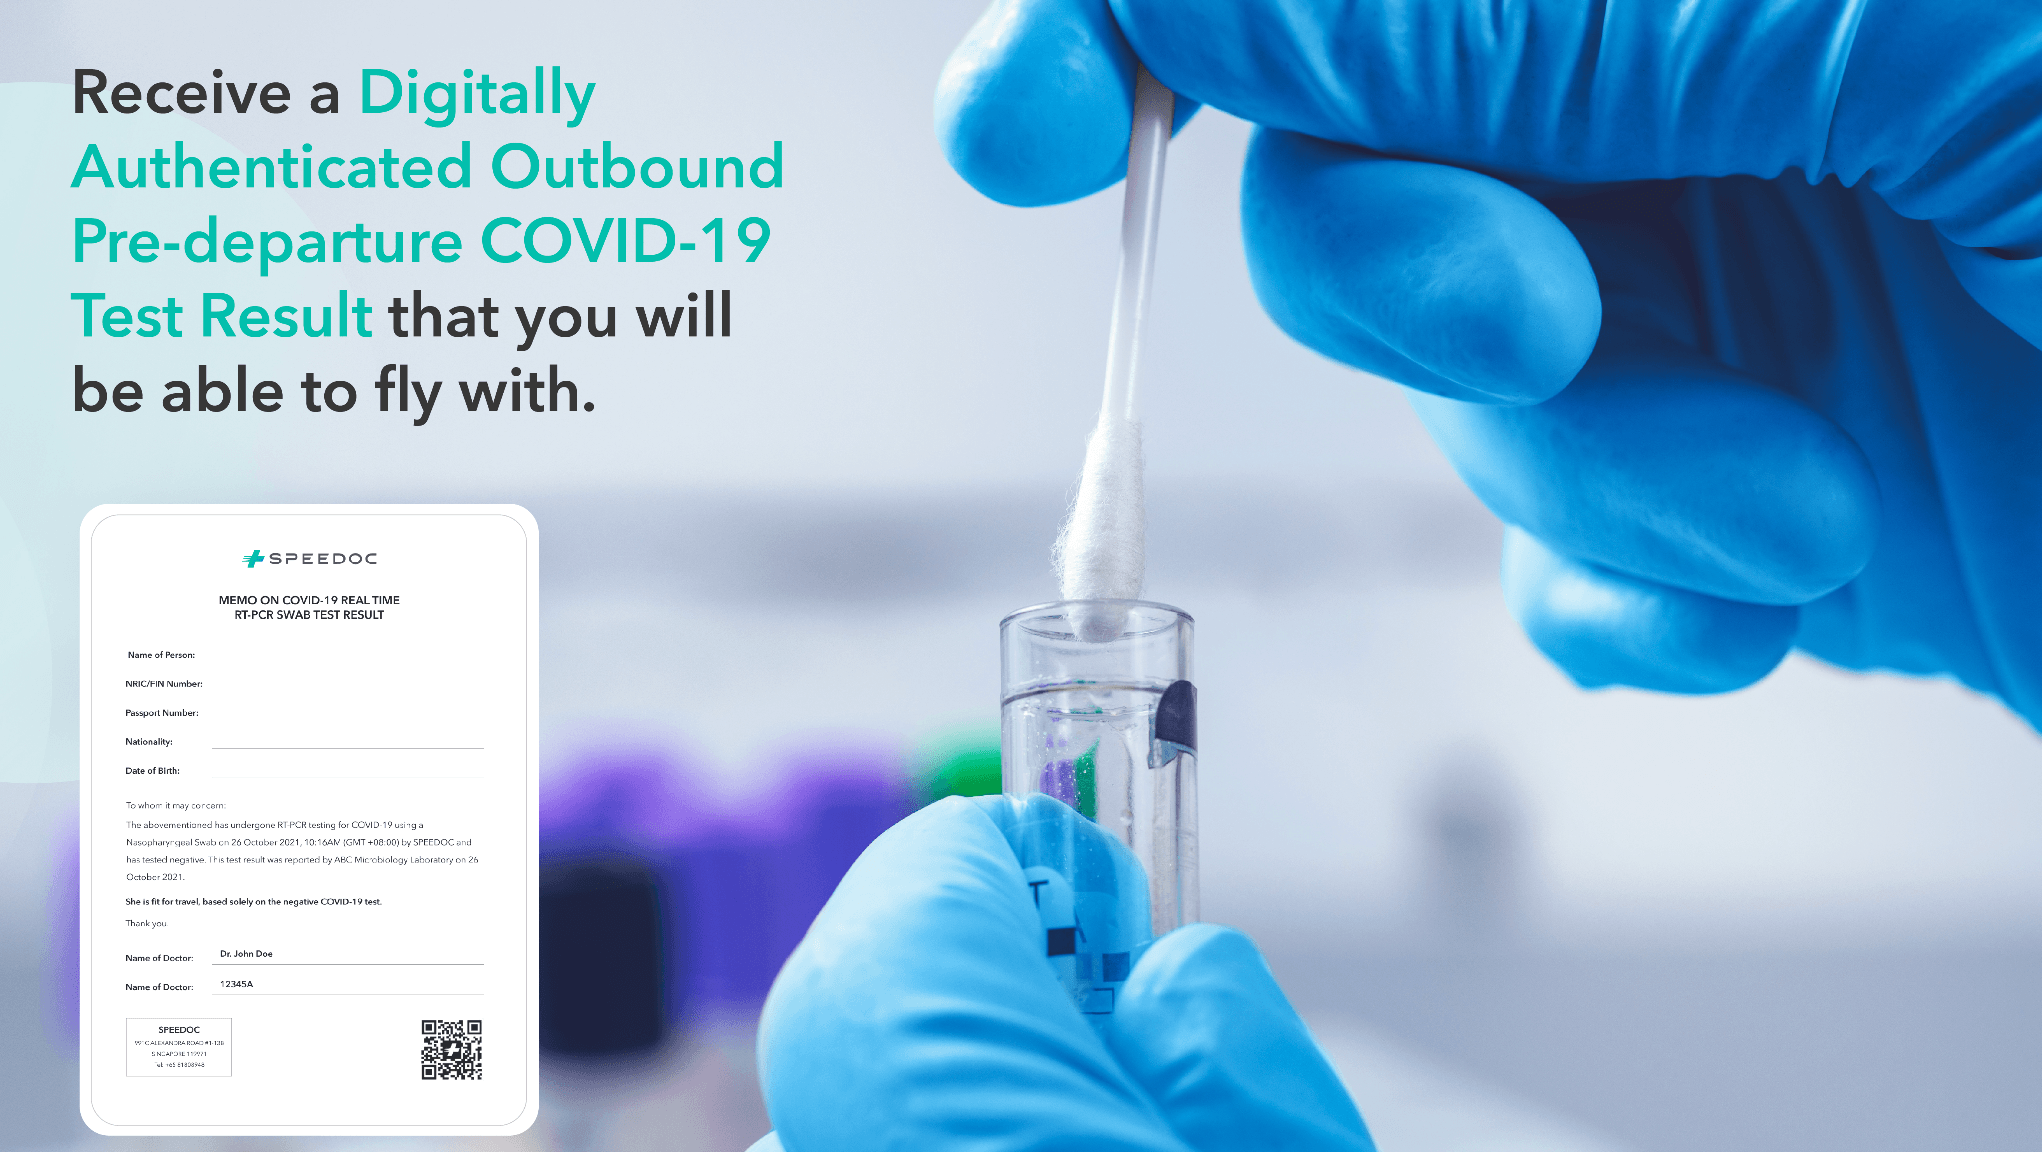 digitally authenticated outbound COVID-19 test result